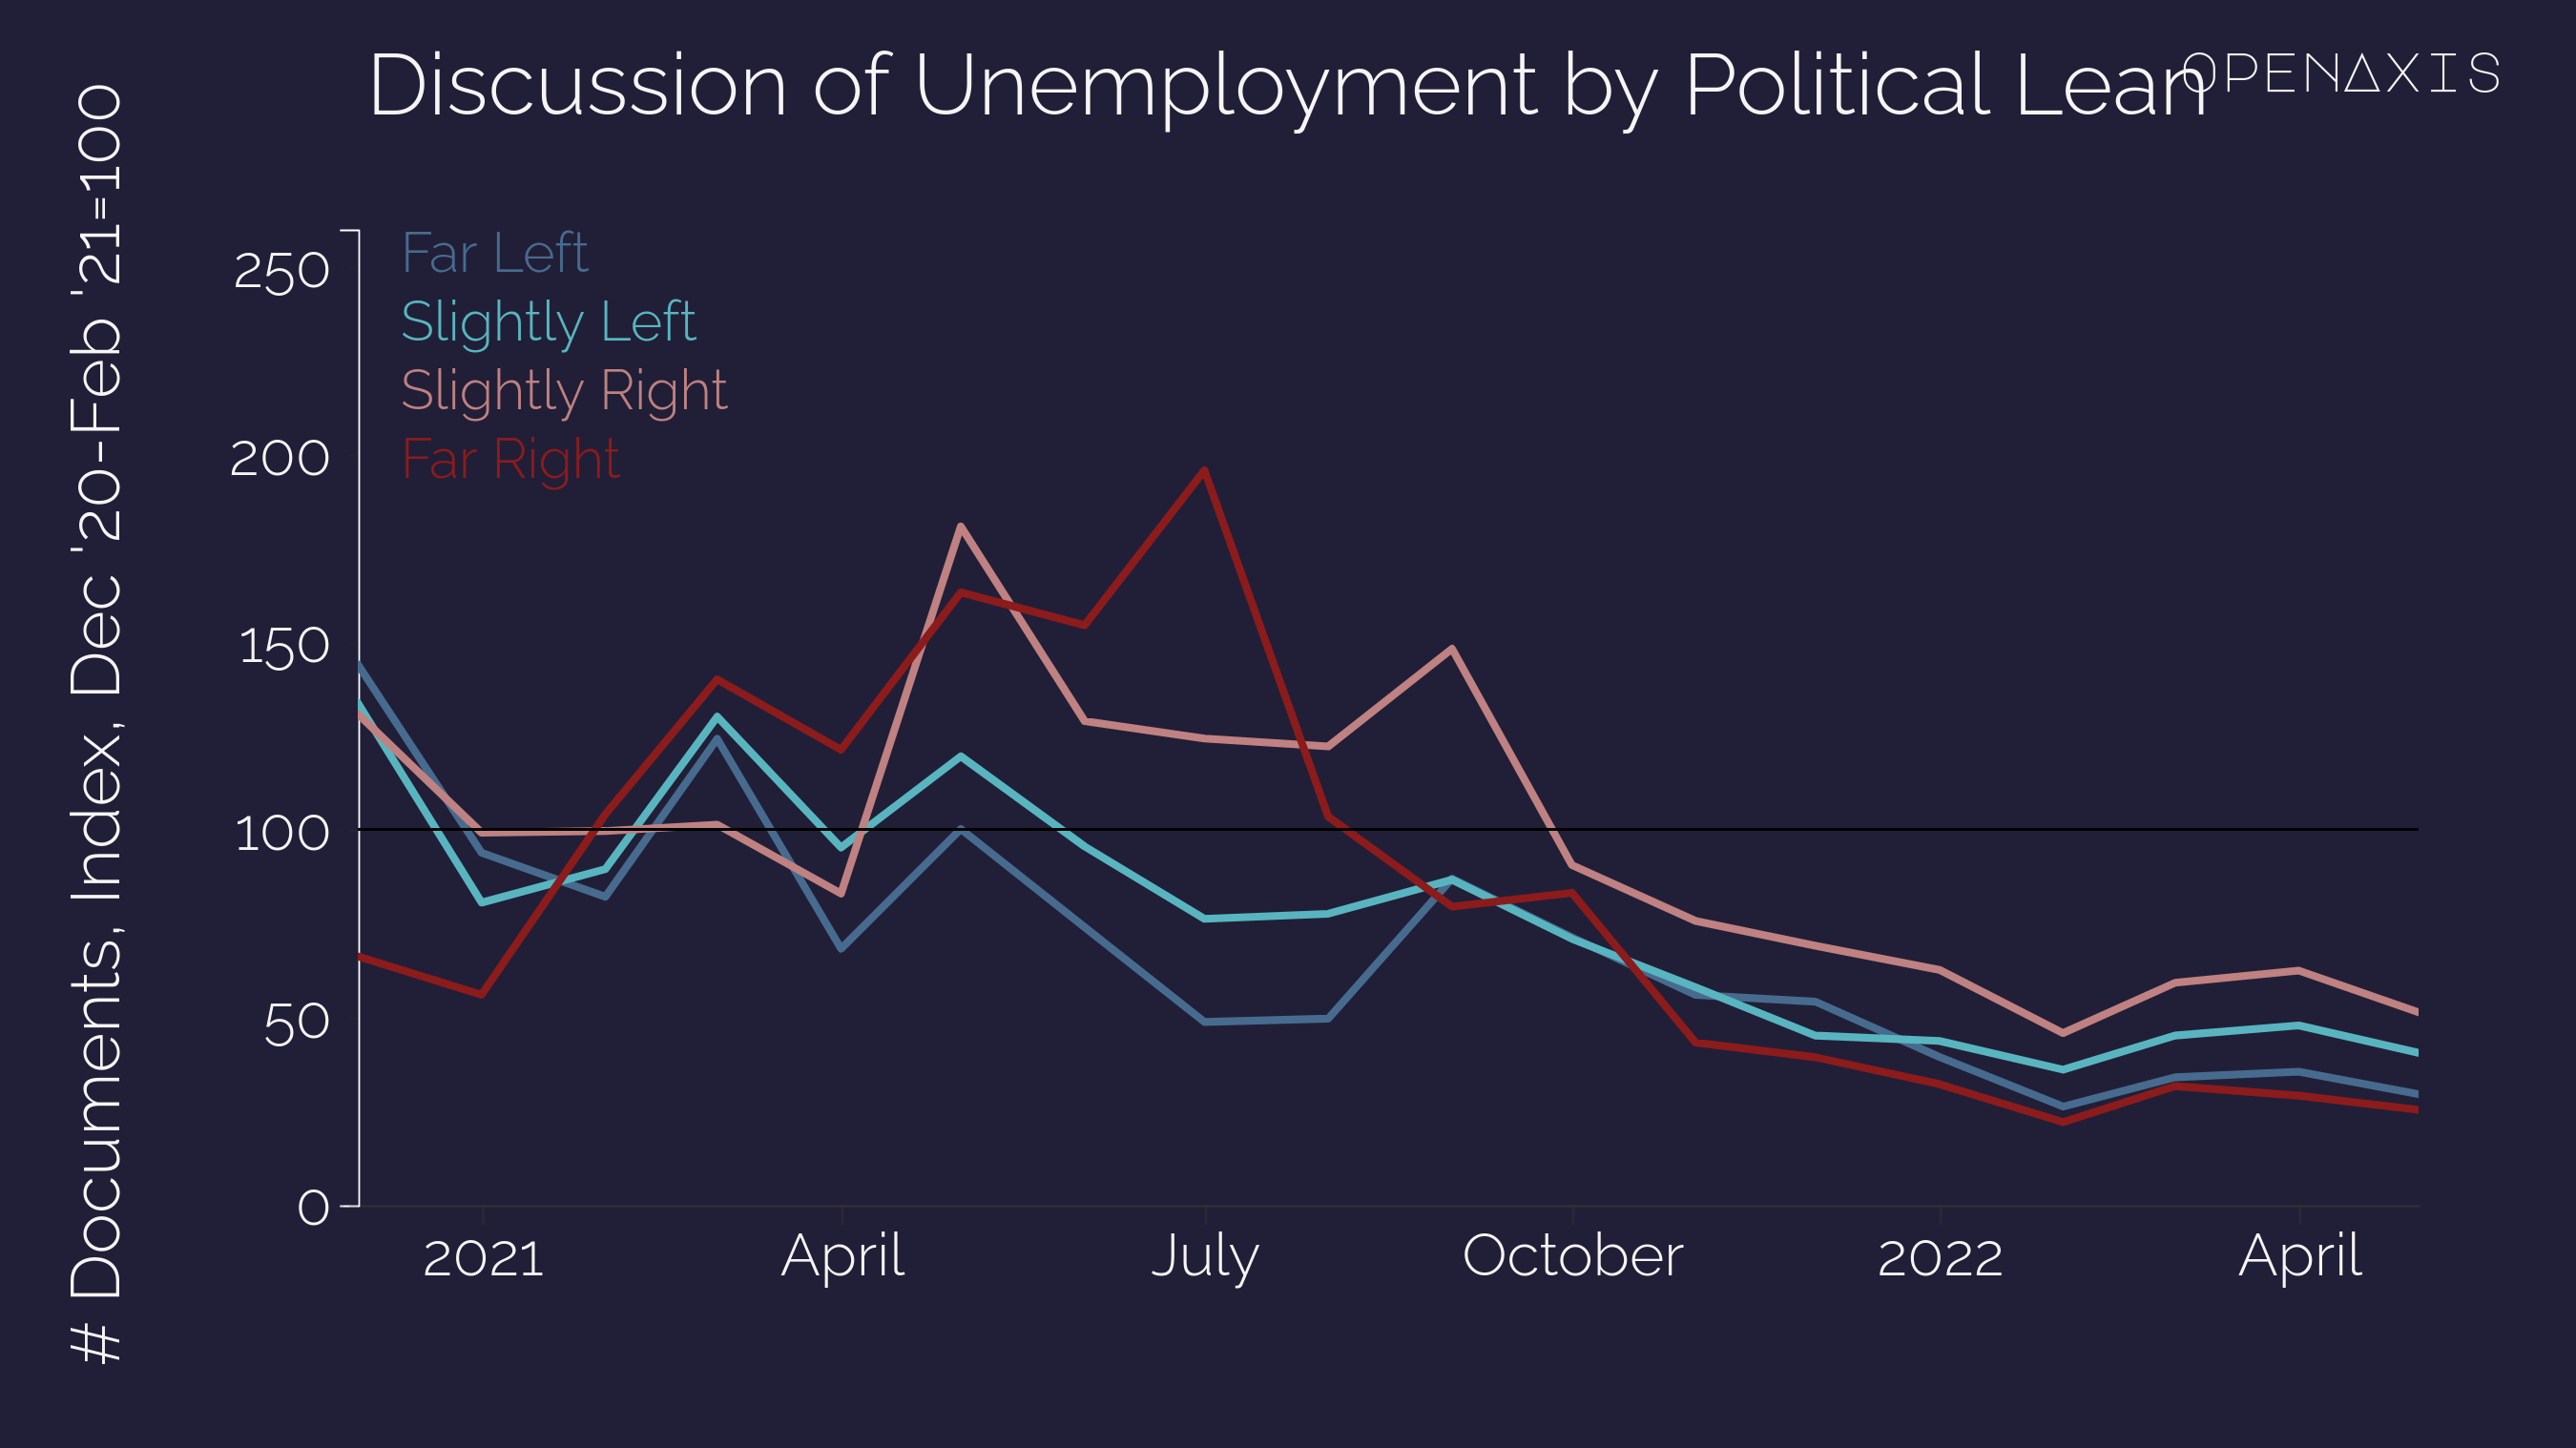 <p>For Q2 and Q3 of 2021, Far Right and Slightly Right outlets talked about unemployment at a disproportionately high rate relative to their base period compared to slightly left and far left. In fact, in July 2021 far right outlets talked about unemployment almost twice the amount they did Dec 2020-Feb-2021 while the Far Left talked about it at half the rate they did in Dec 2020-Feb-2021.</p><p><br /></p><p>These differences diminished leading into 2022 with the Far Right talking about unemployment at a disproportionately low rate in April 2022 as the unemployment rate itself fell to 3.6%.</p><p><br /></p><p>Source: <a href="https://app.openaxis.com/data/3872" target="_blank">PeakMetrics</a></p>